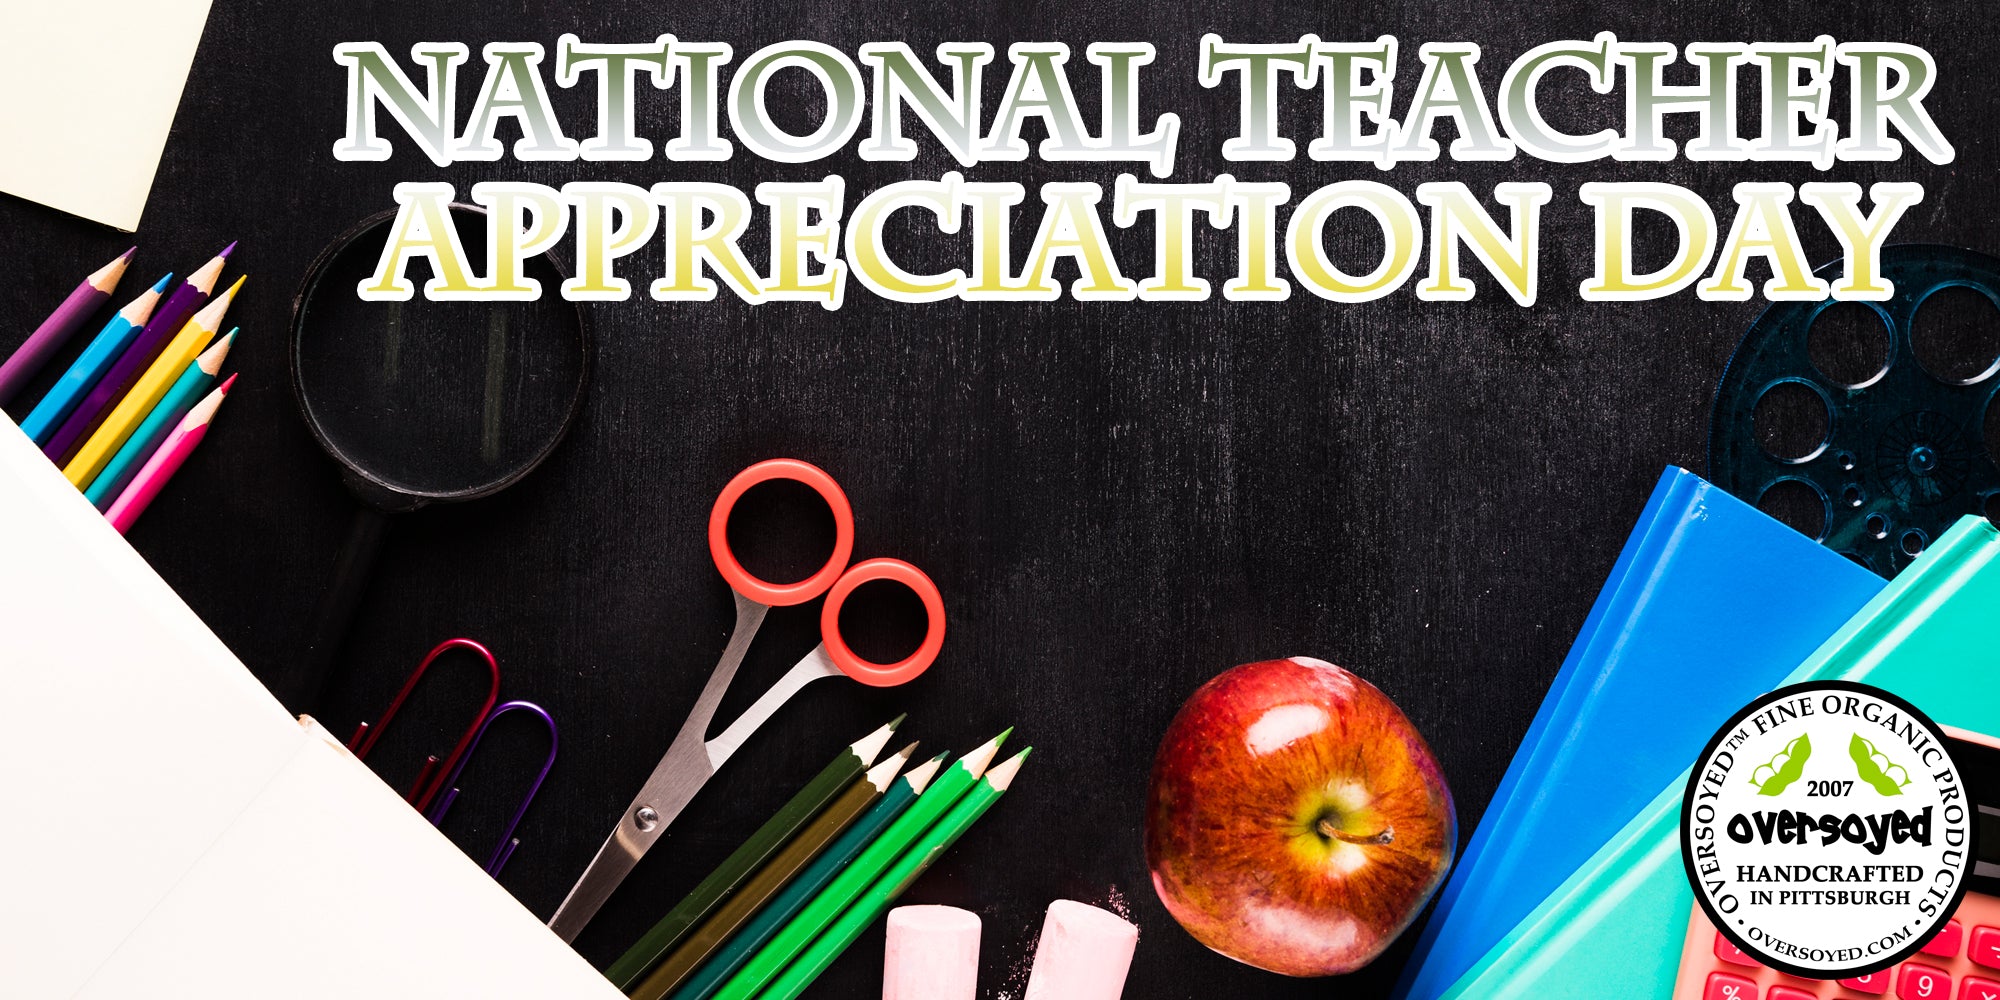 OverSoyed Fine Organic Products - National Teacher Appreciation Day